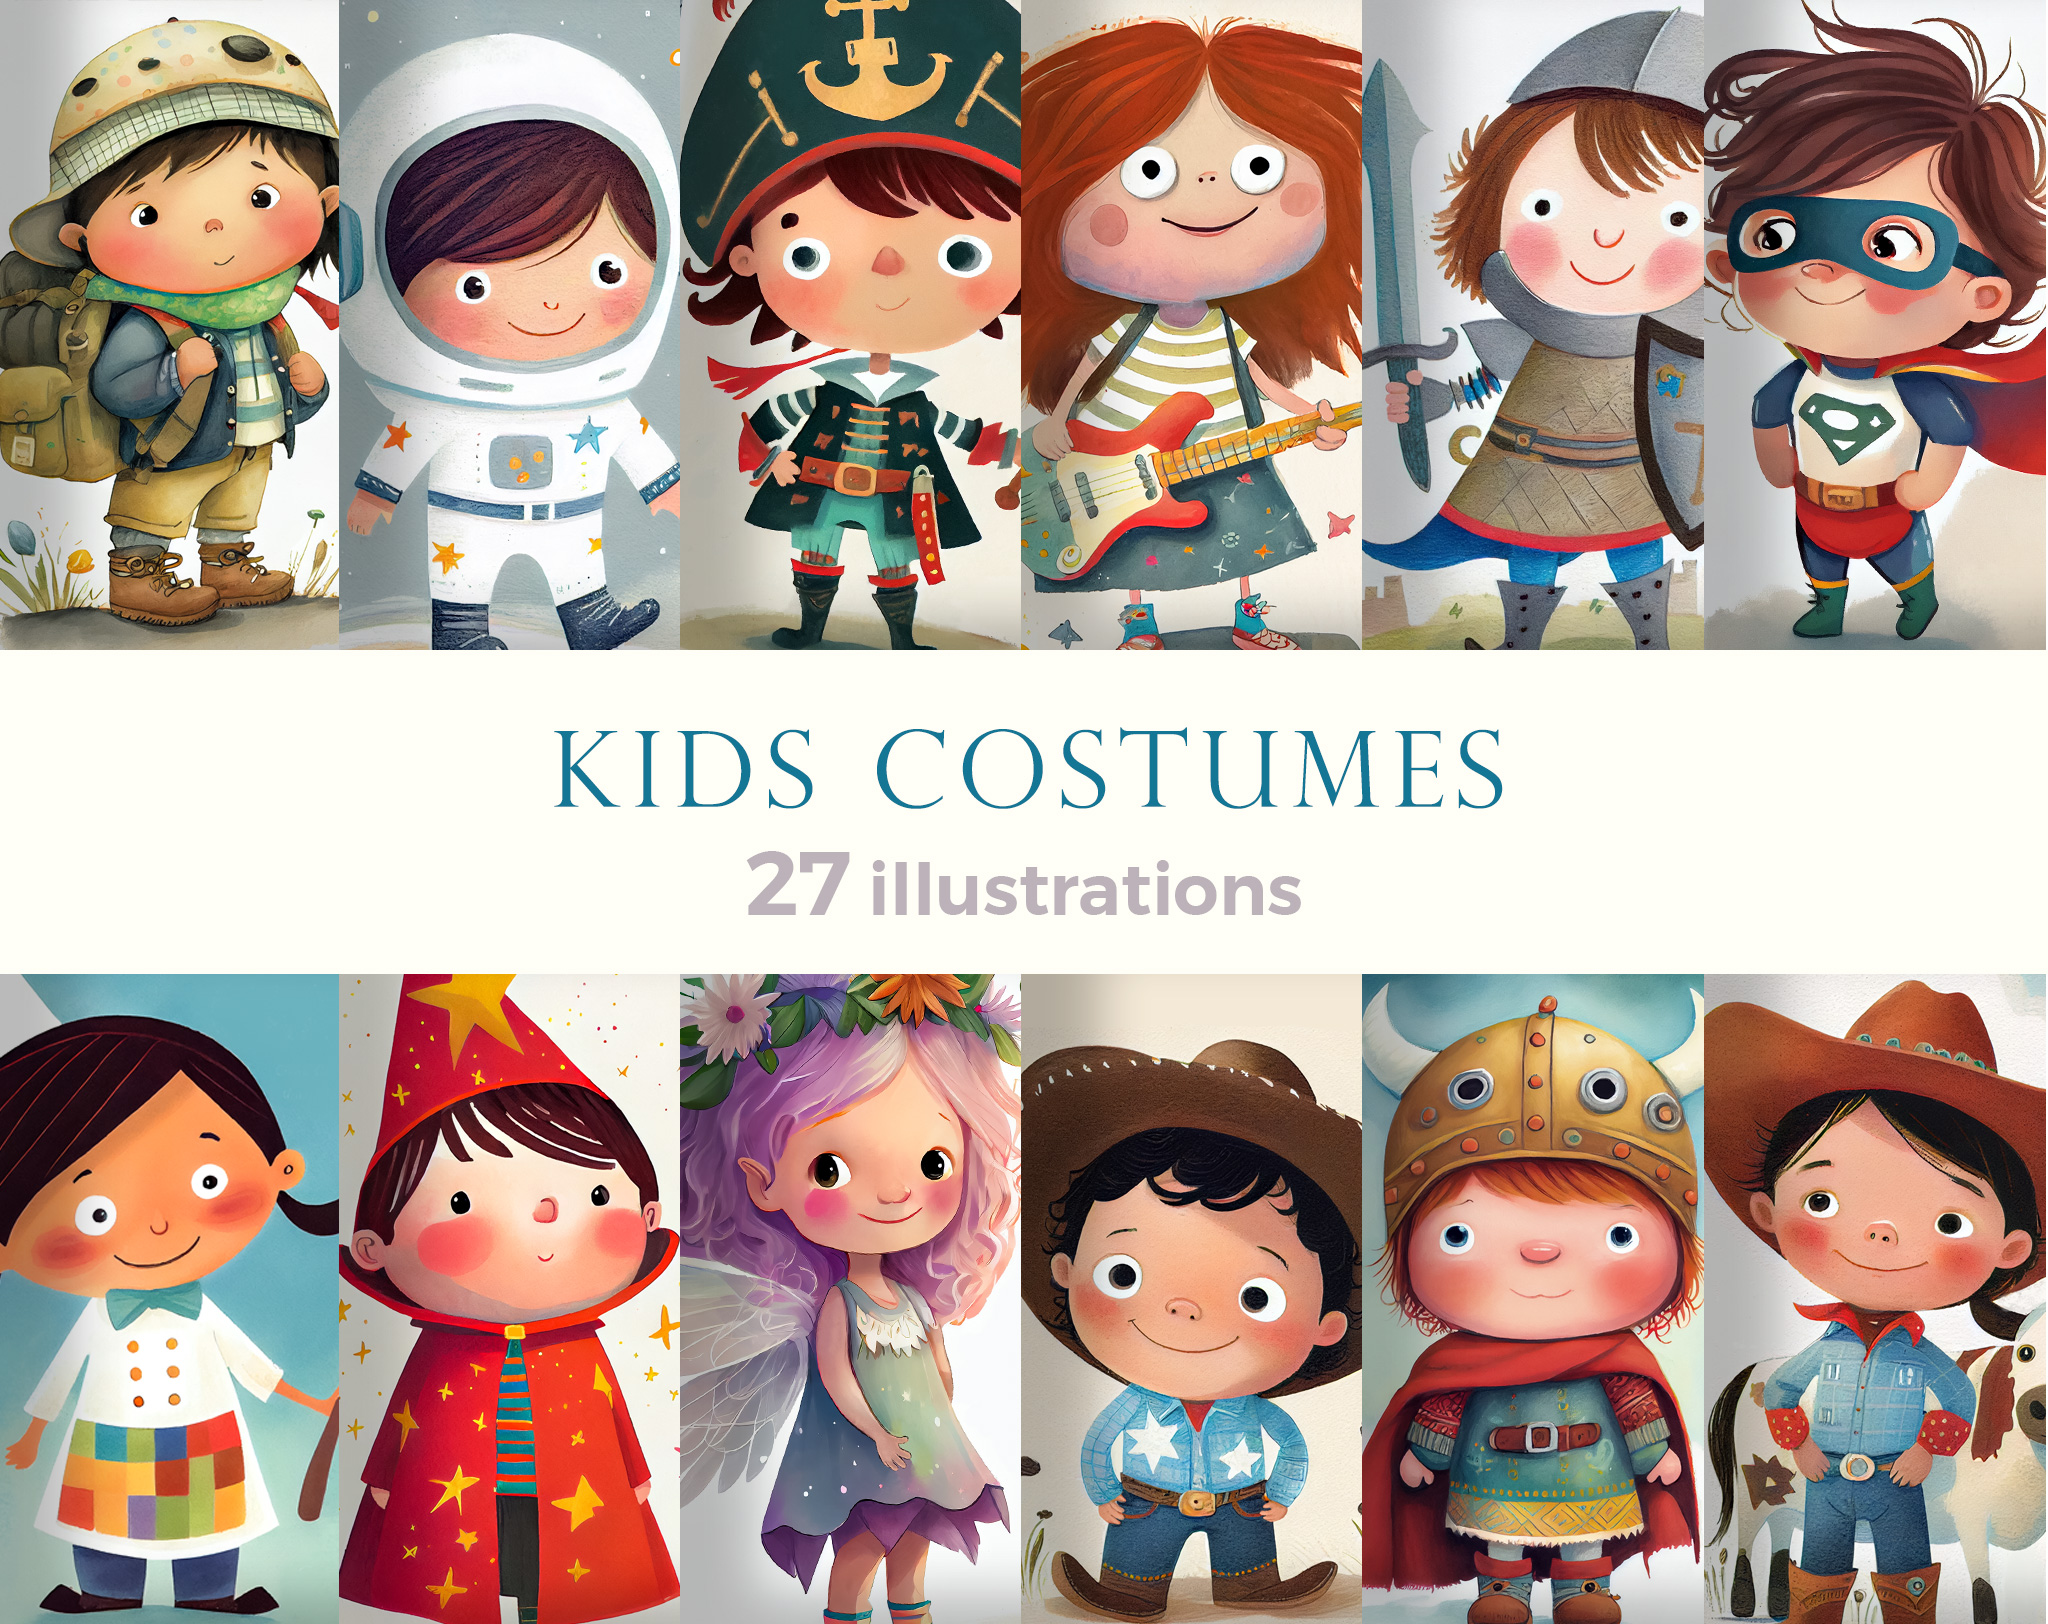 Cartoon little kids in different costumes like wizard, fairy, cowboy, pirate